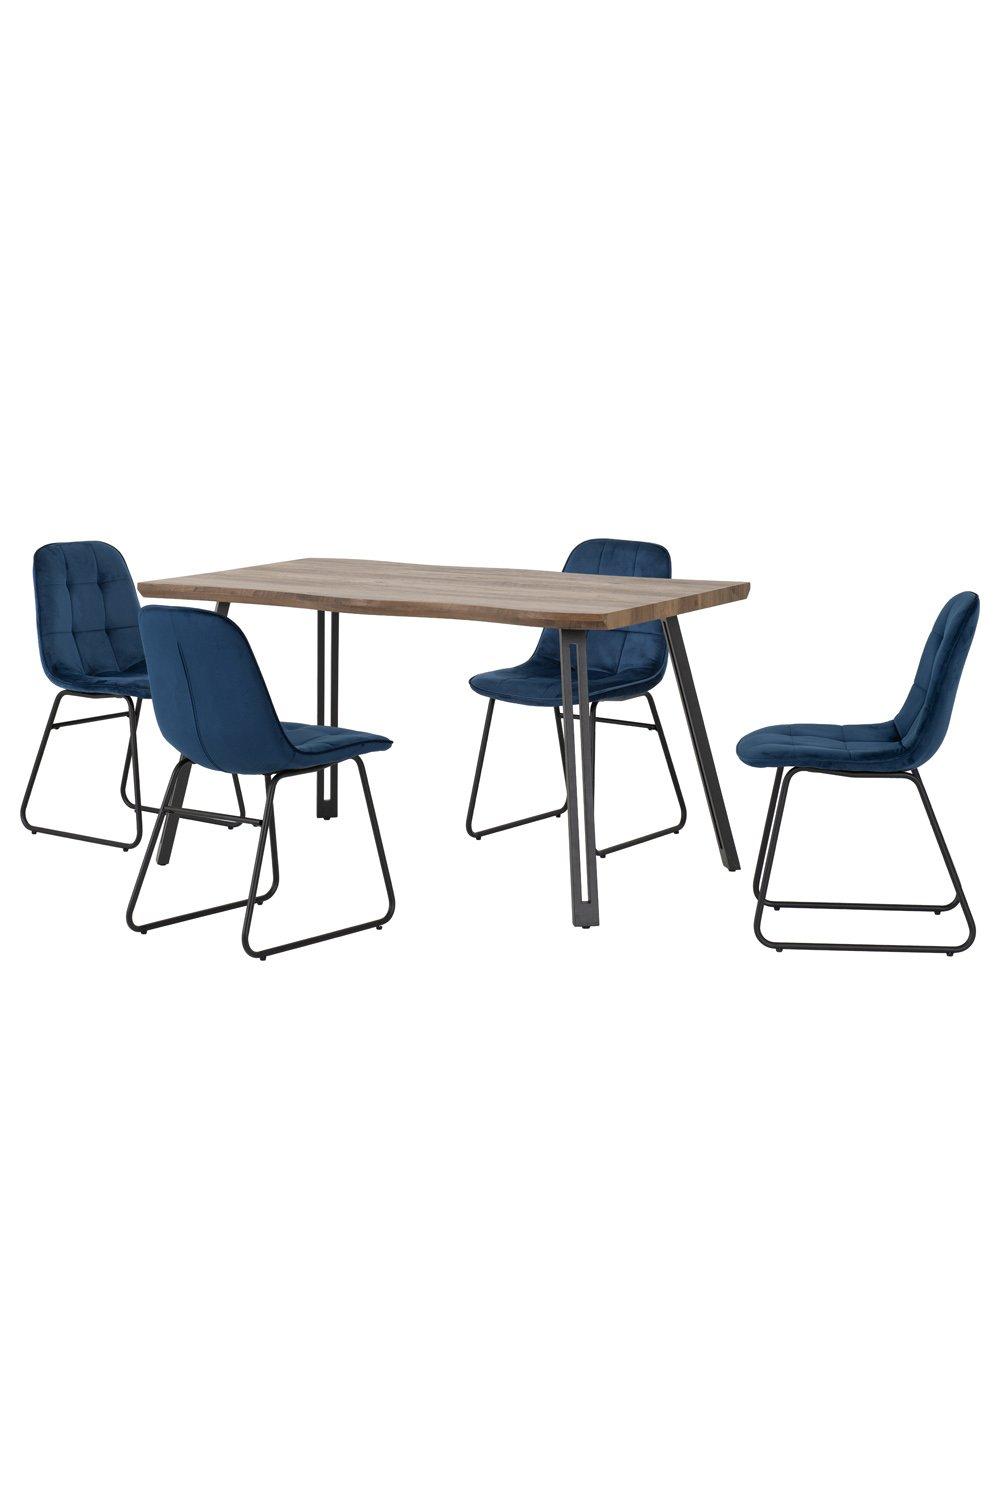 Quebec Wave Edge Dining Set with Lukas Chairs